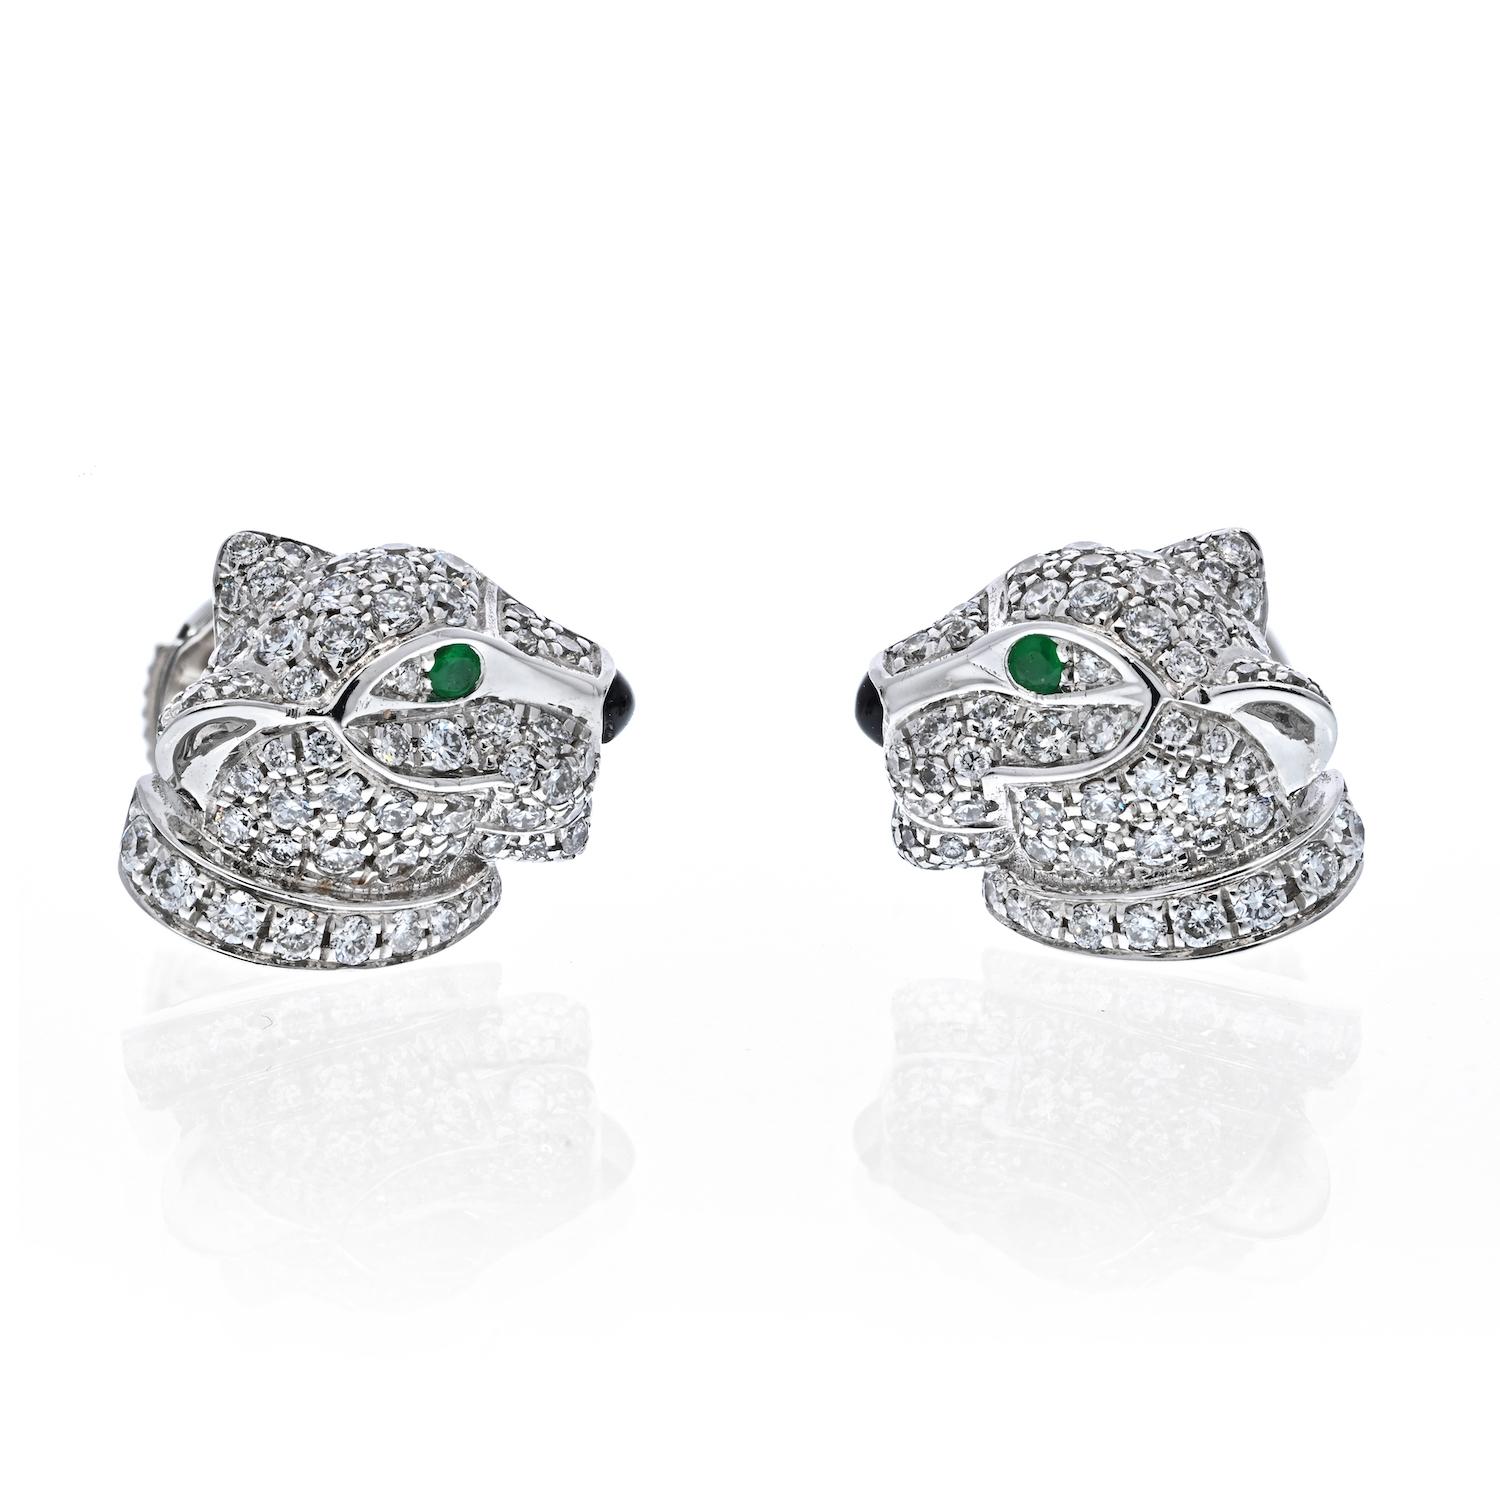 Each is designed as a panther's head set with diamonds, emerald eyes and onyx nose. 
A delightful pair of Cartier 18k gold diamond, emerald and onyx earrings from the Panthere de Cartier collection.

Metal: 18k white gold
Diamonds: 120 round